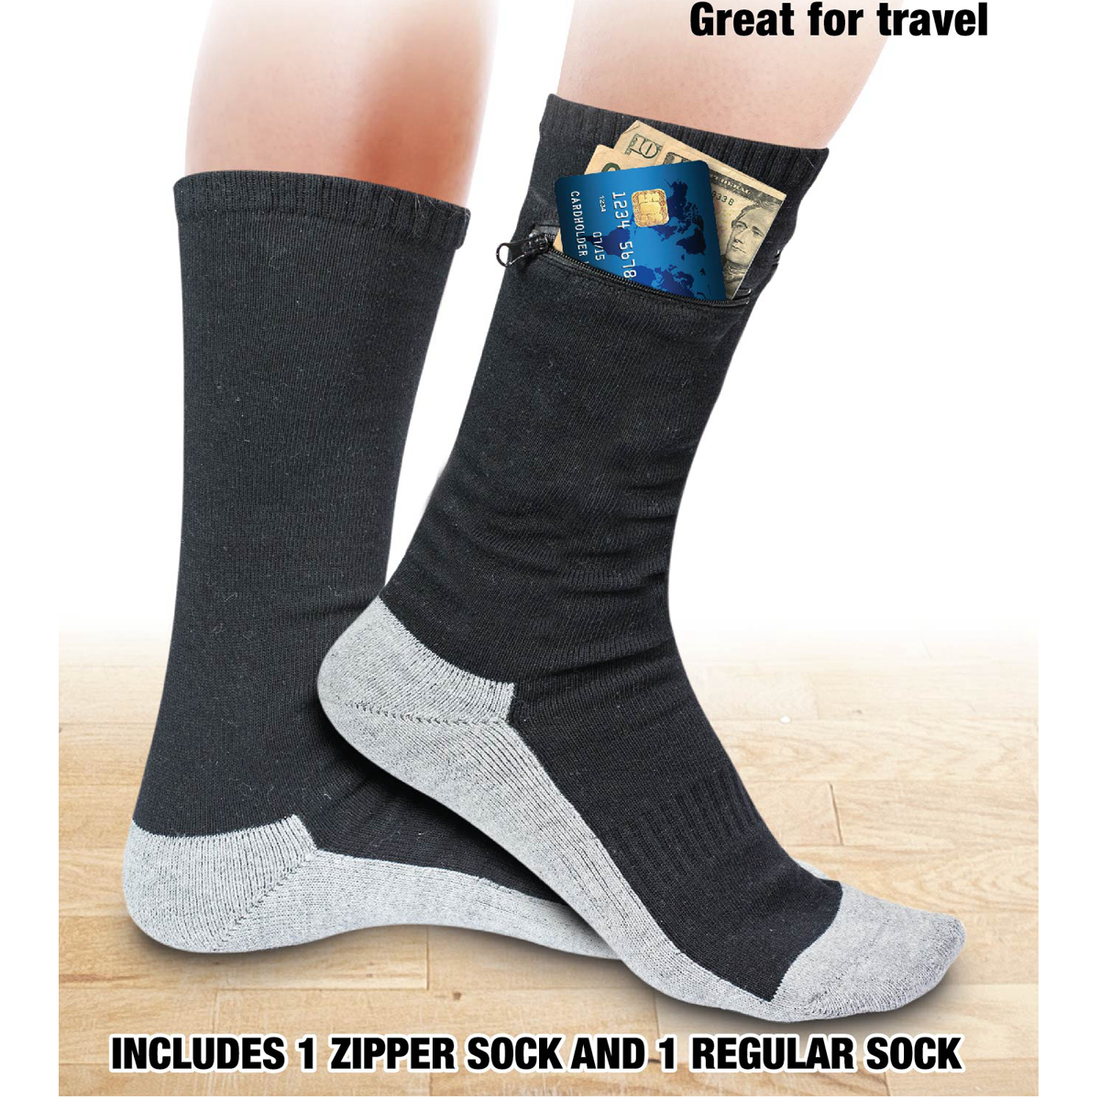 Travels socks with a pocket